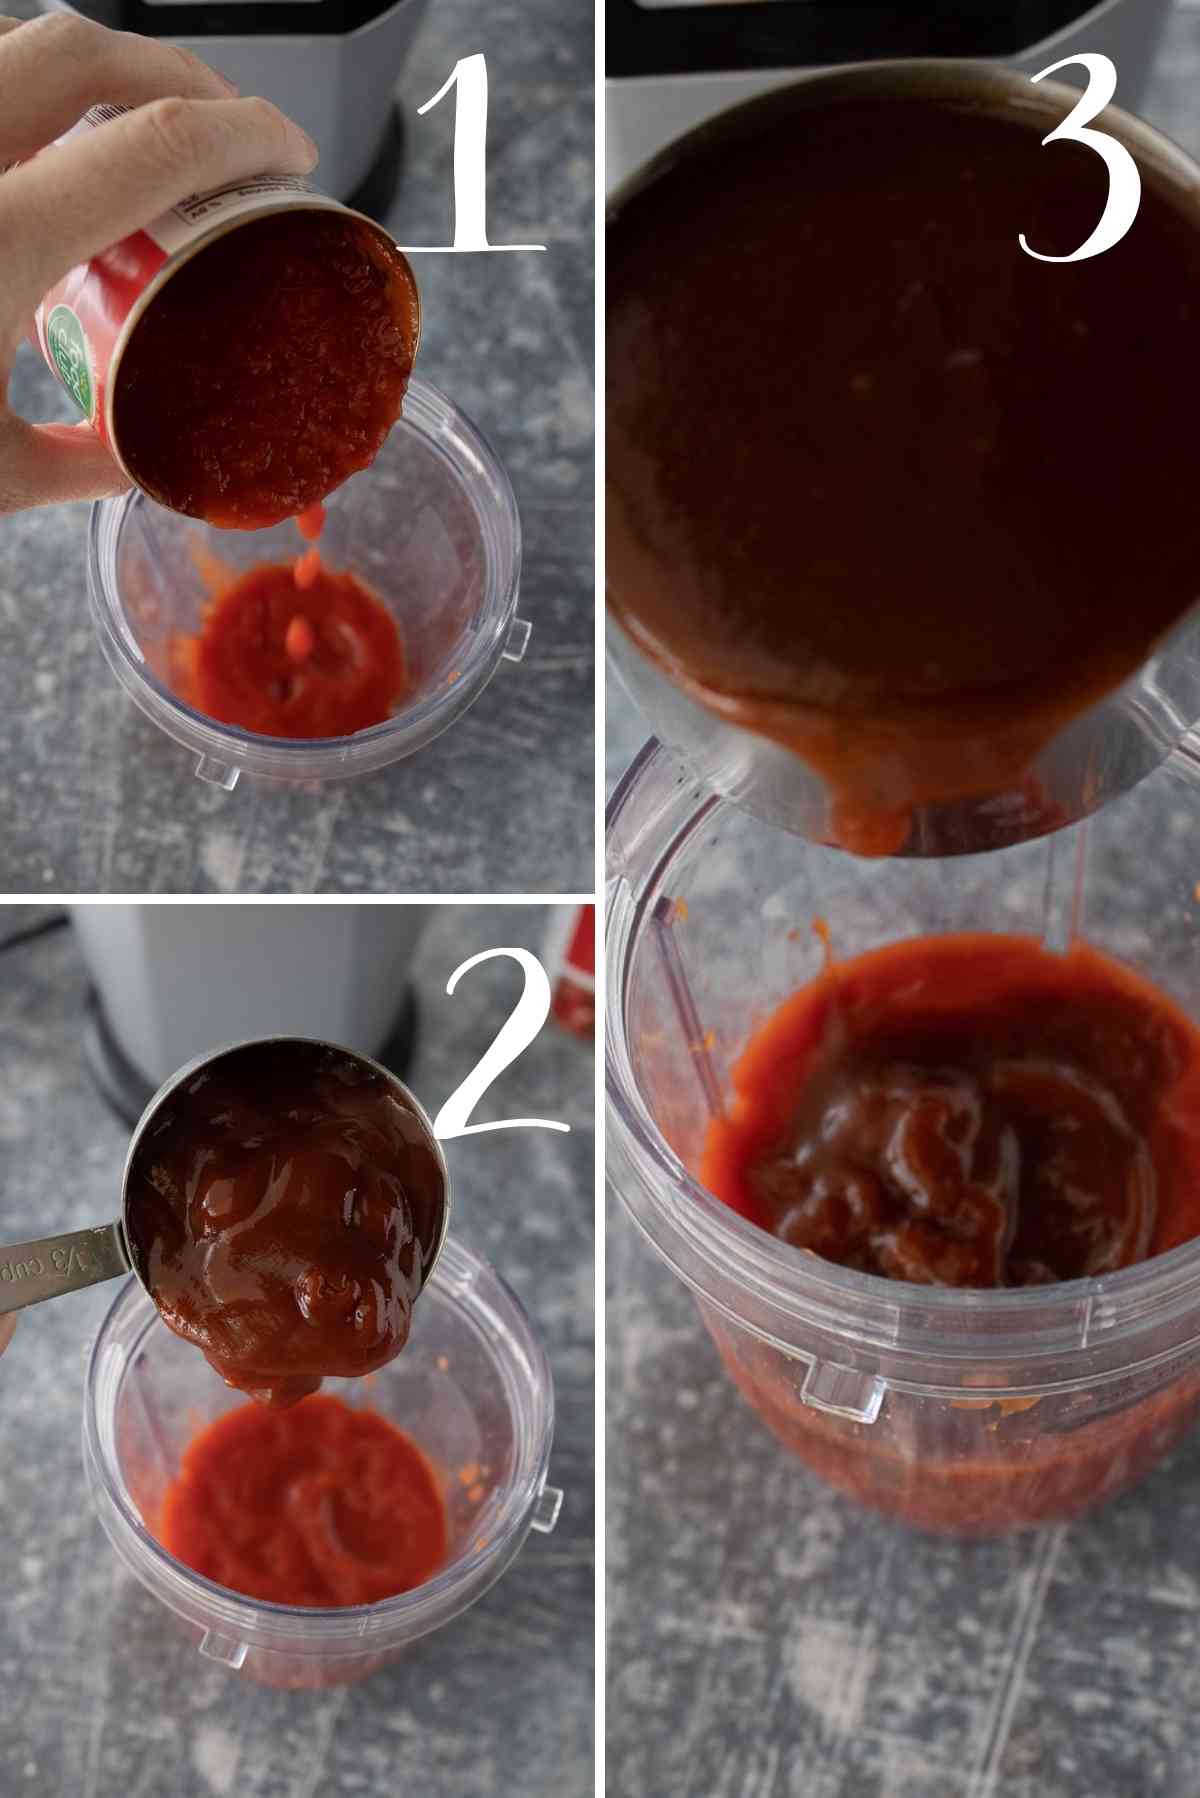 Pour tomato sauce, ketchup and barbecue sauce into a blender cup.